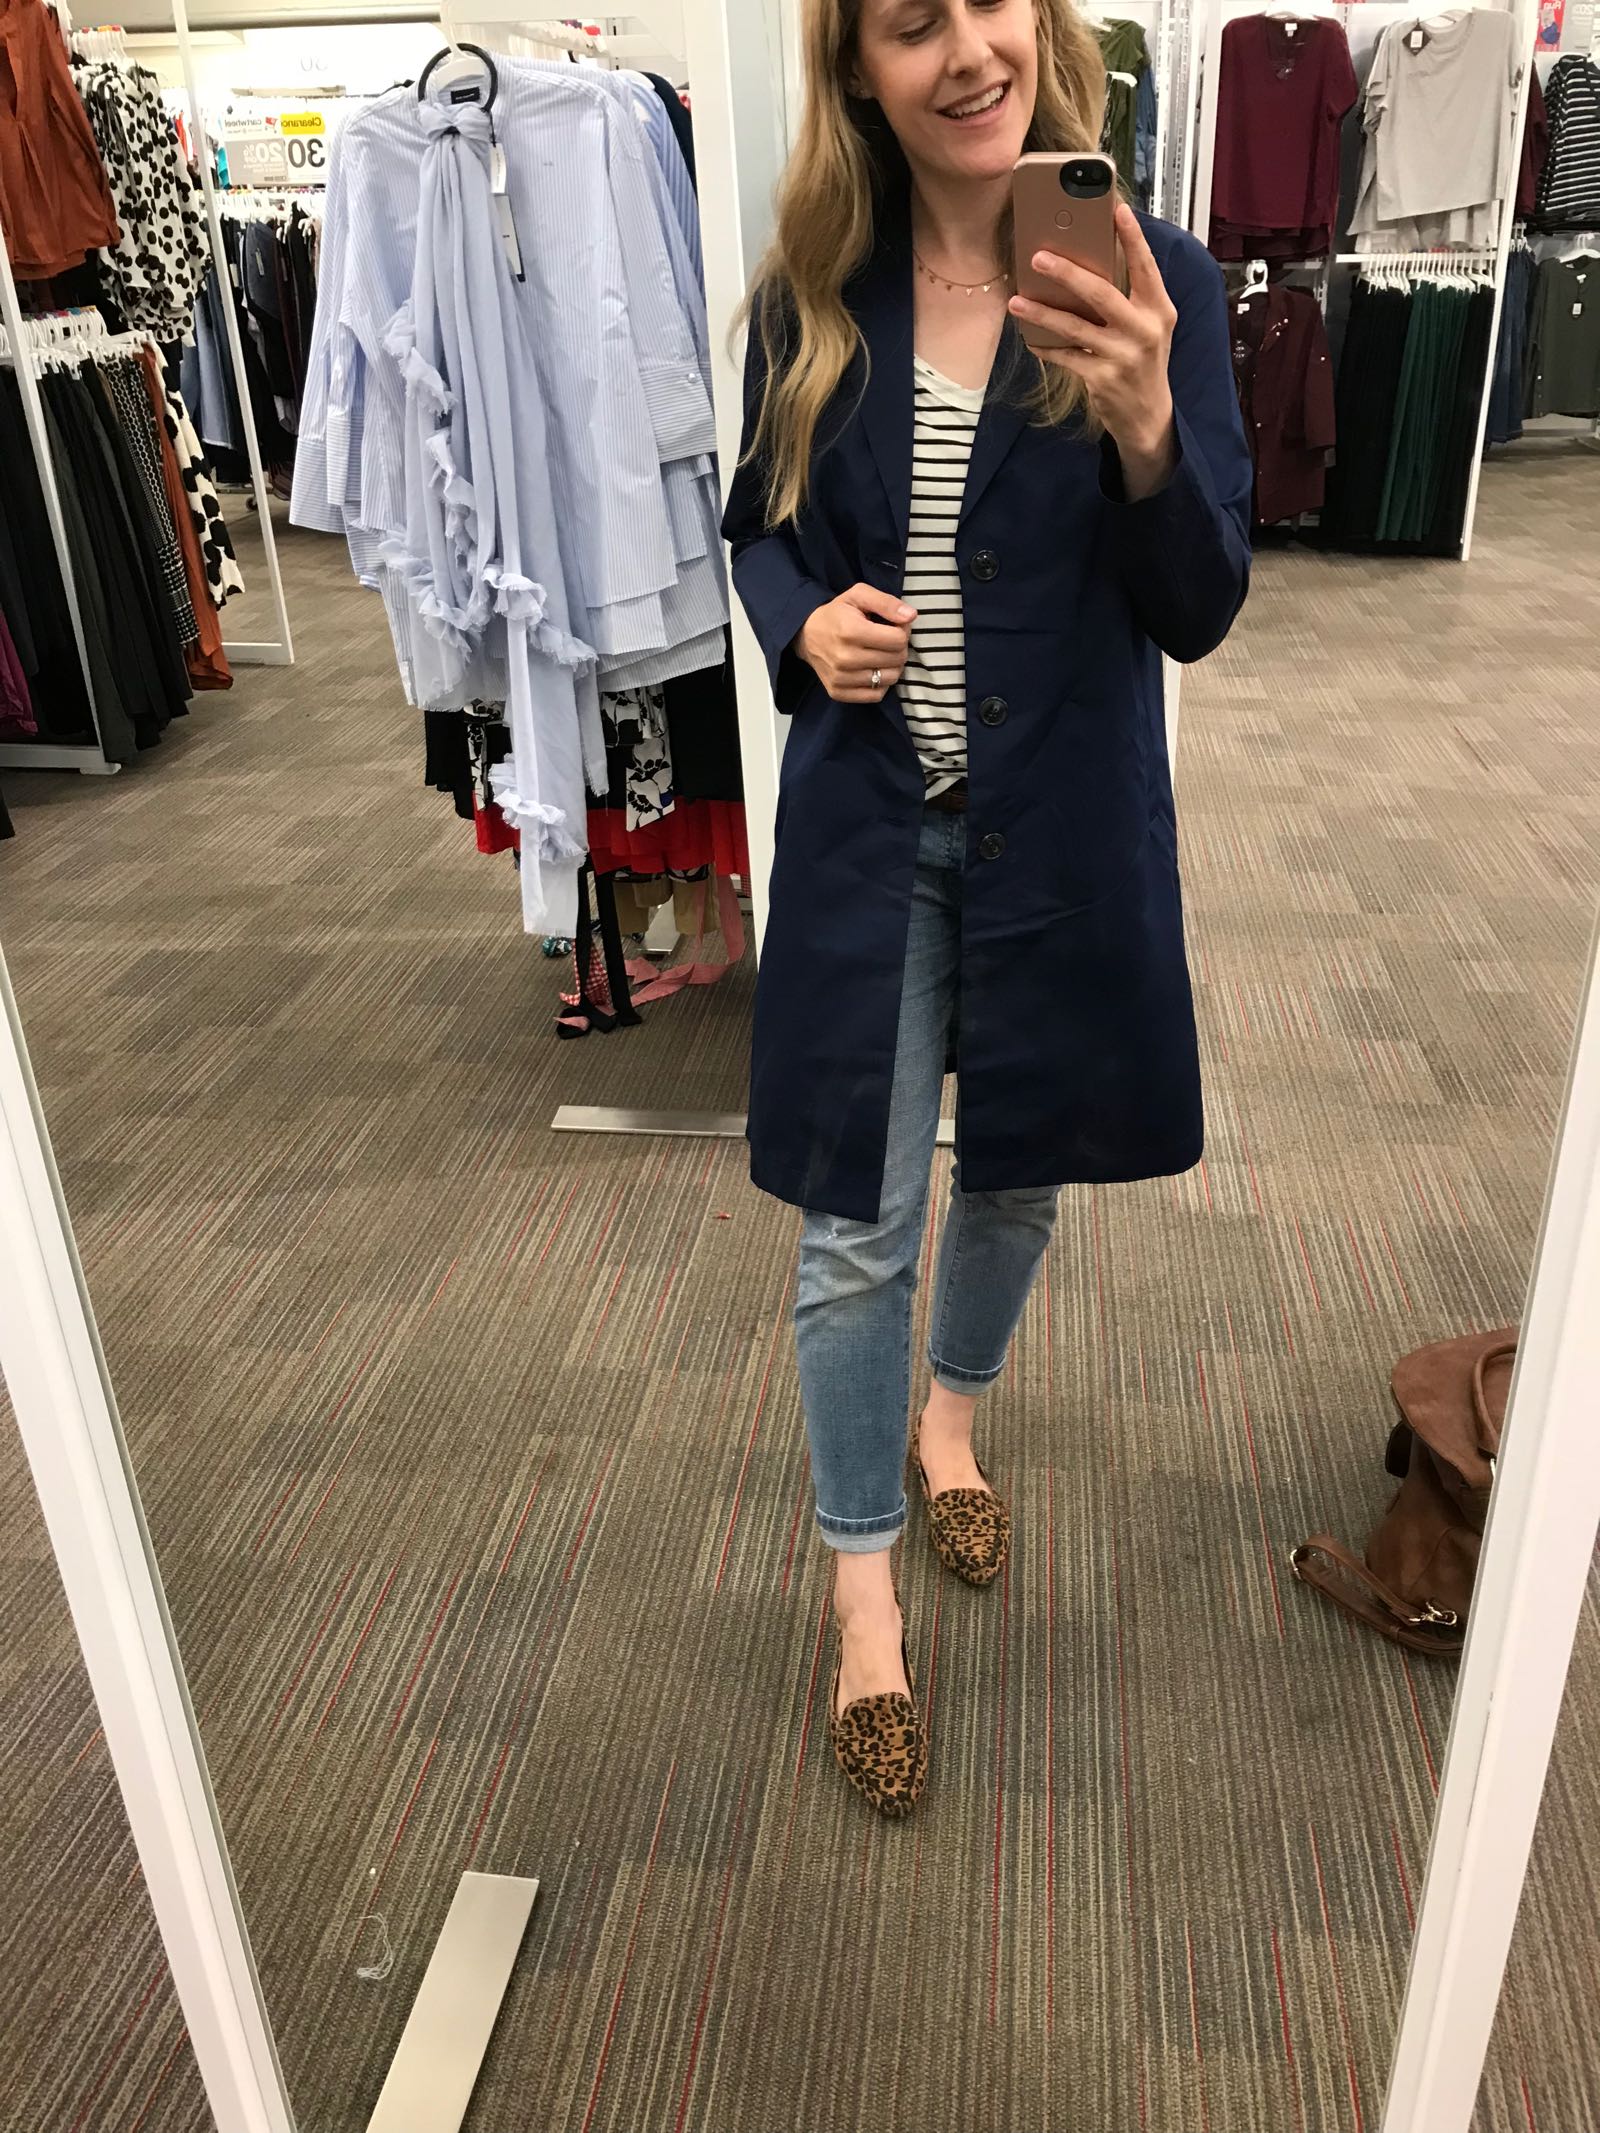 This blogger reviews Target's new minimal collection Prologue